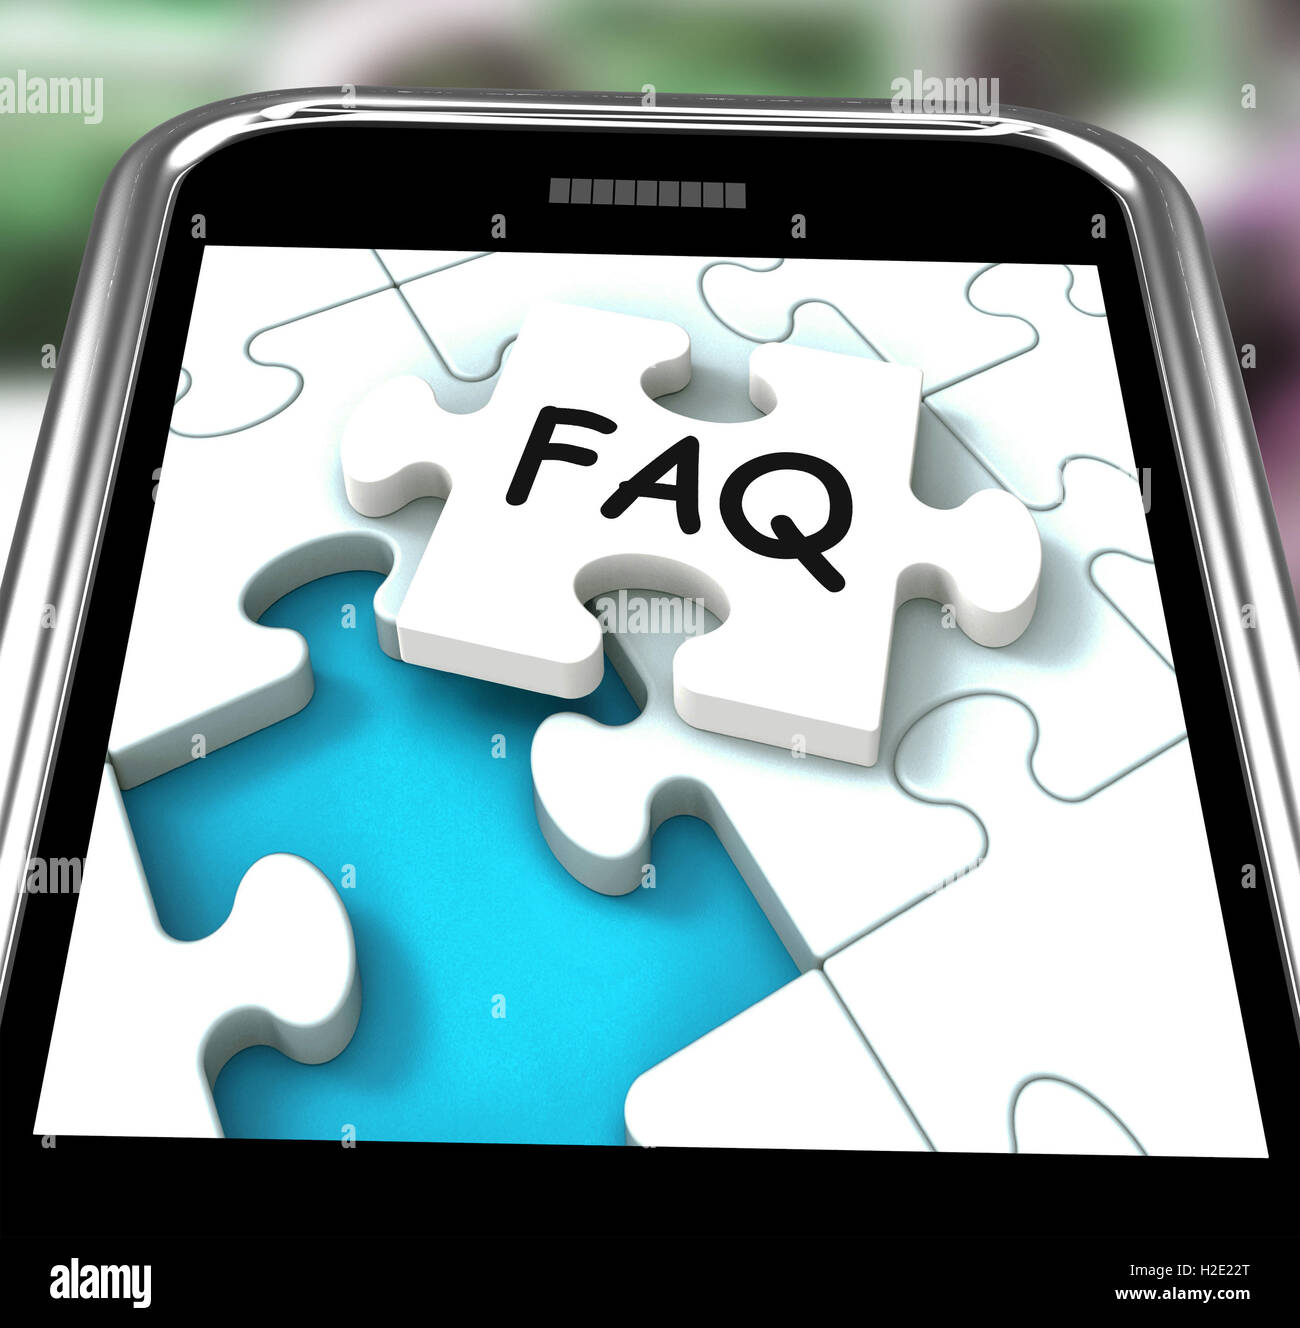 FAQ Smartphone Means Website Questions And Solutions Stock Photo